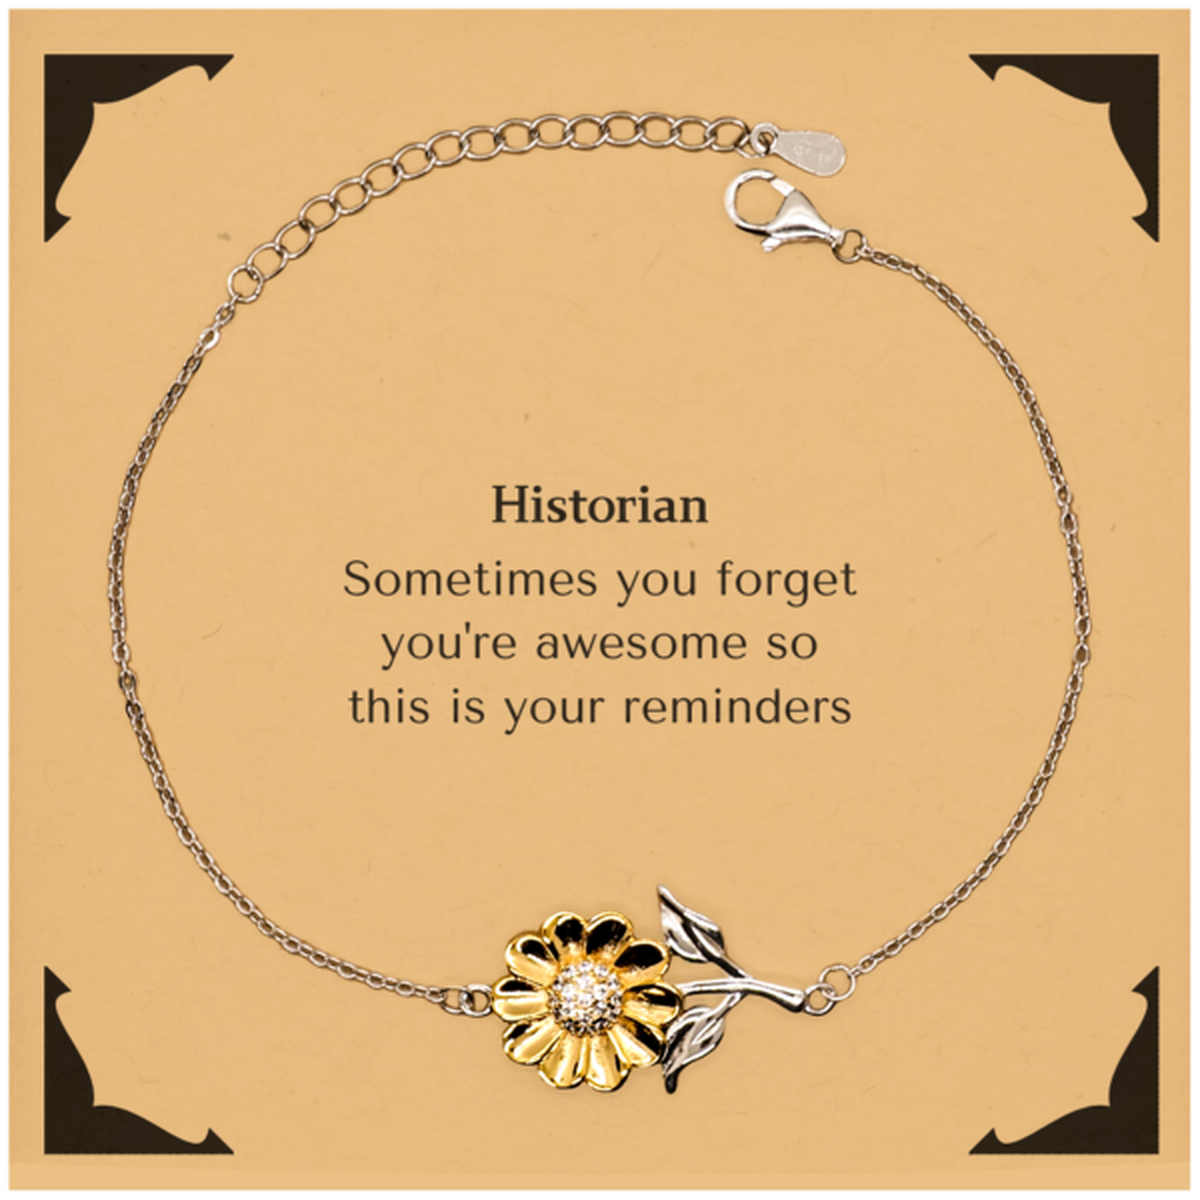 Sentimental Historian Sunflower Bracelet, Historian Sometimes you forget you're awesome so this is your reminders, Graduation Christmas Birthday Gifts for Historian, Men, Women, Coworkers